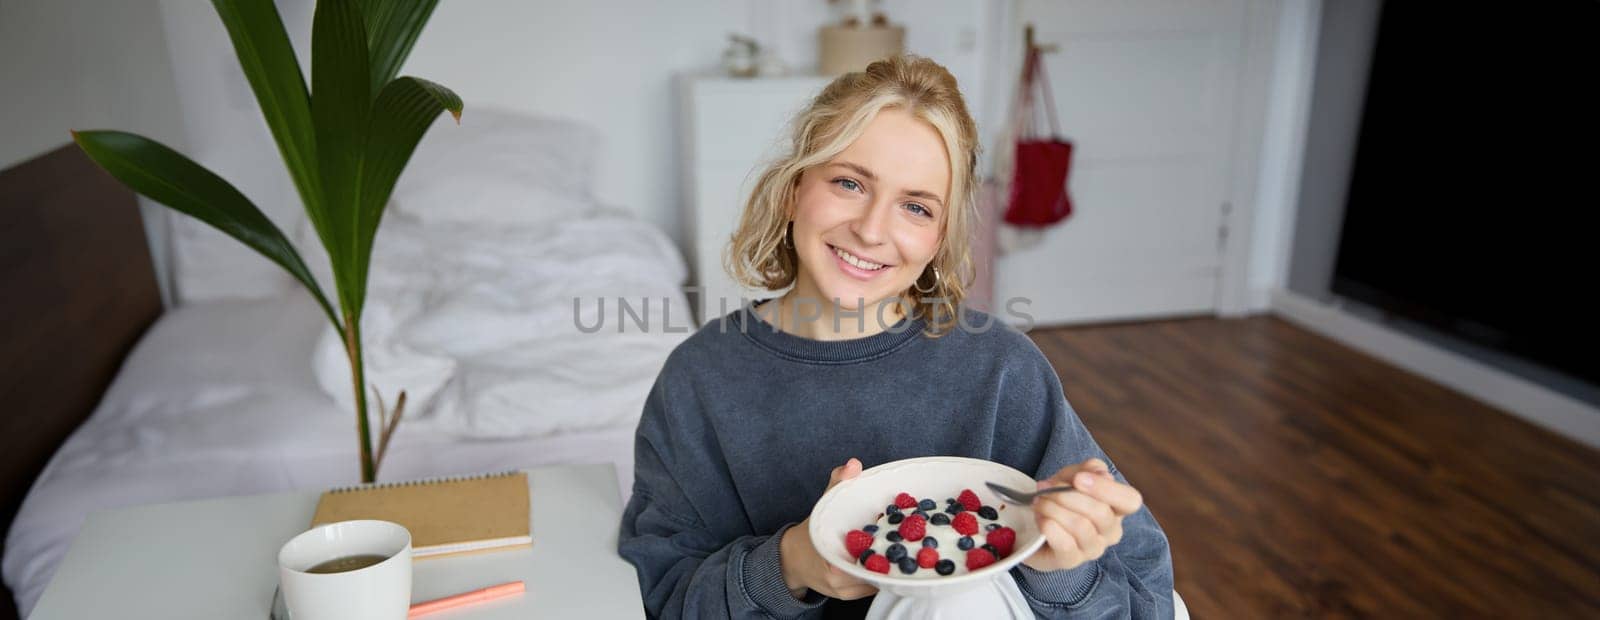 Cute girl eats breakfast and drinks tea in her room, makes herself healthy lunch in bowl, sits in bedroom.